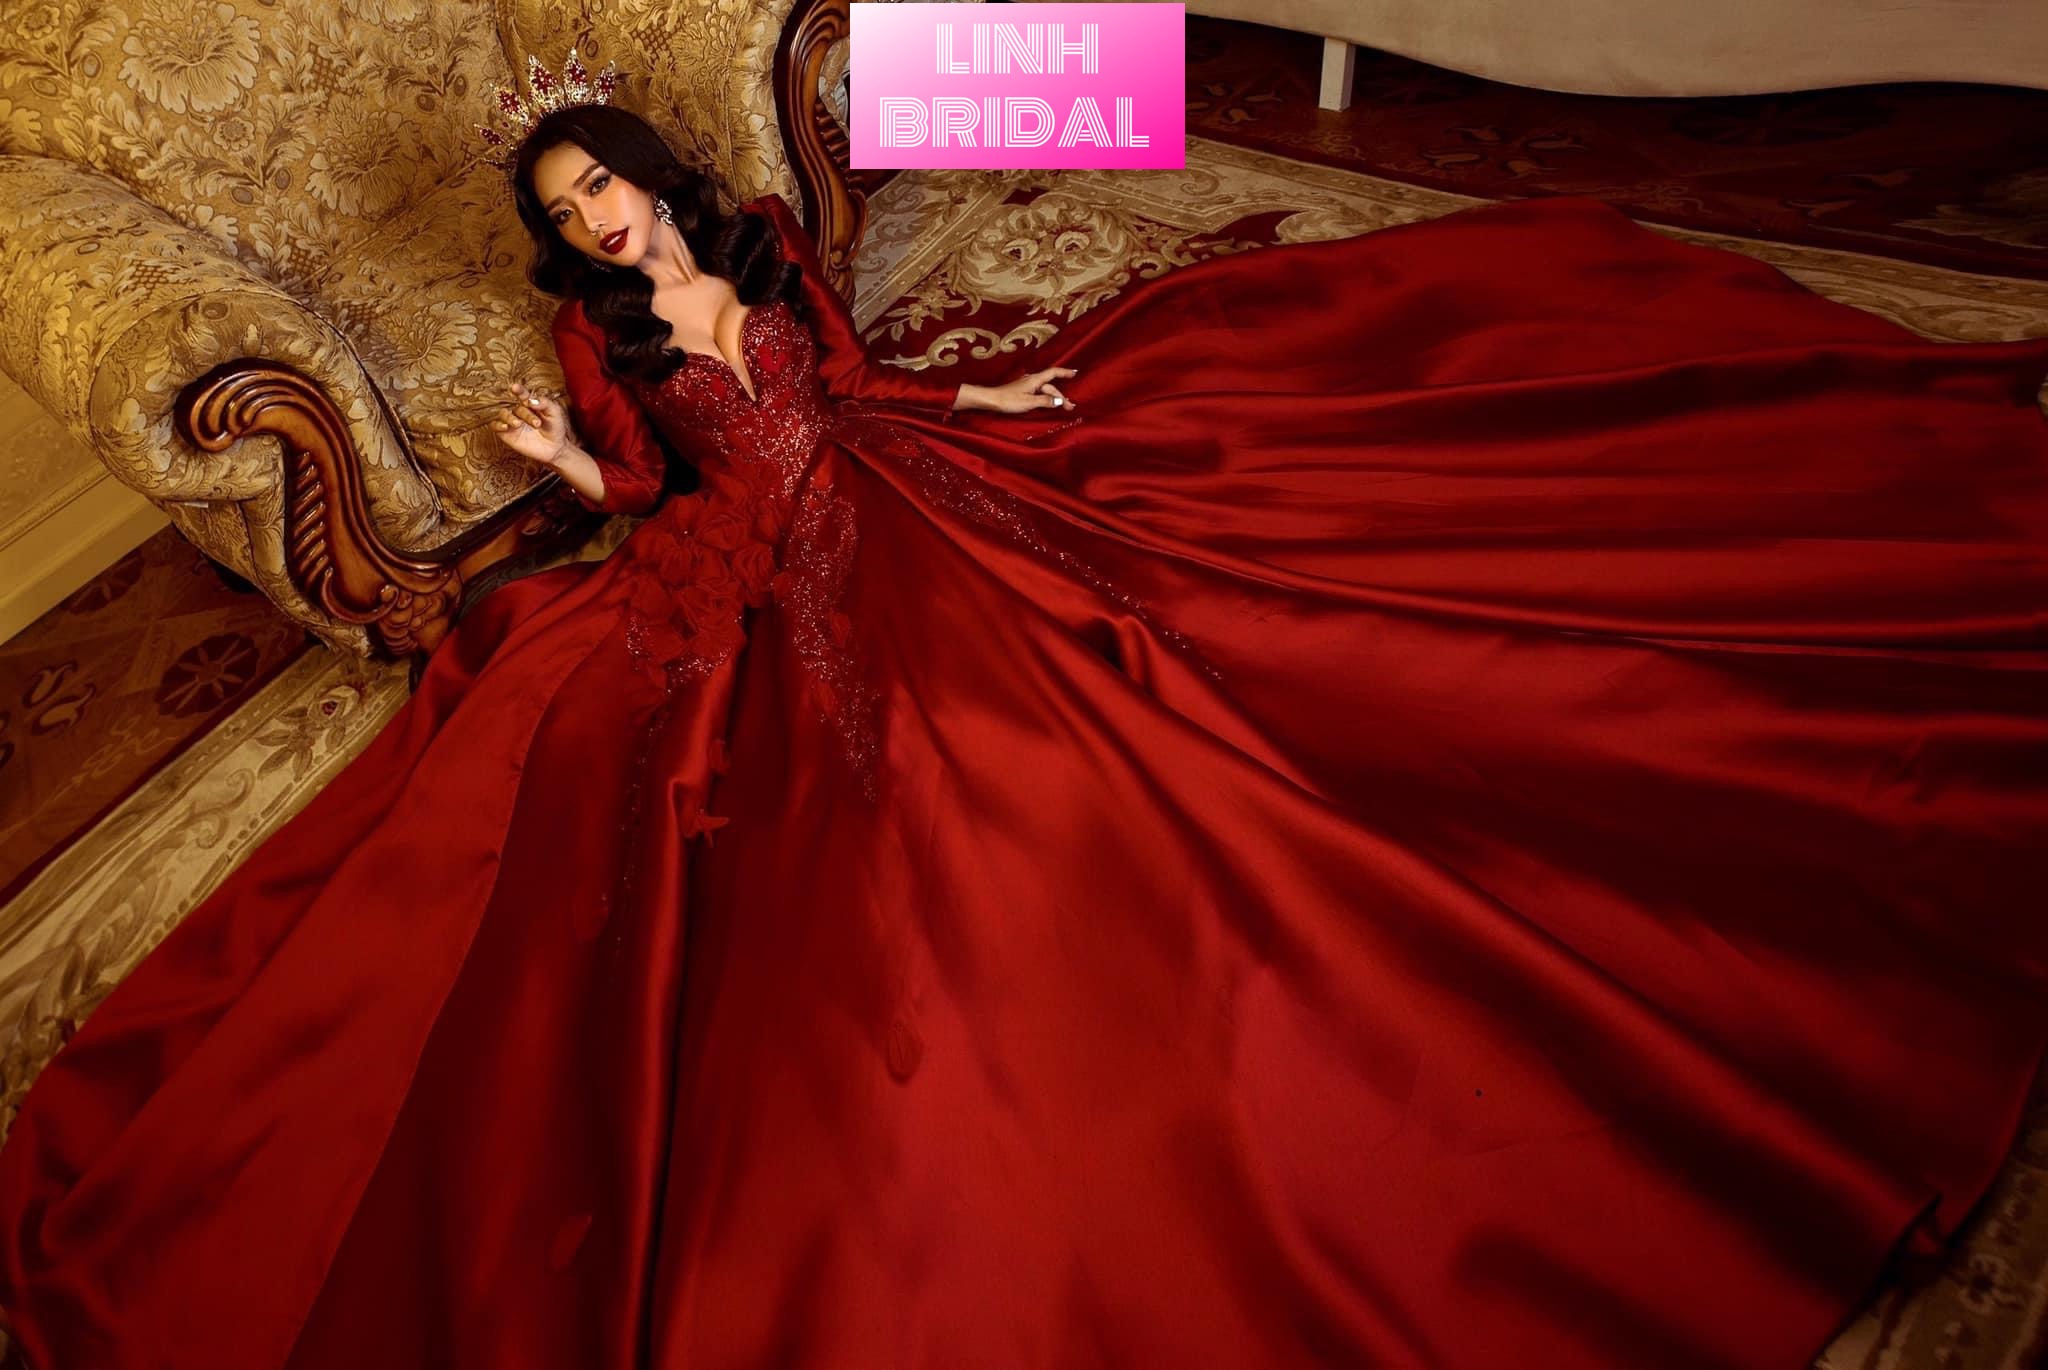 spray akademisk golf Extravagant red satin ball gown wedding/prom dress with red flower and  glitter details